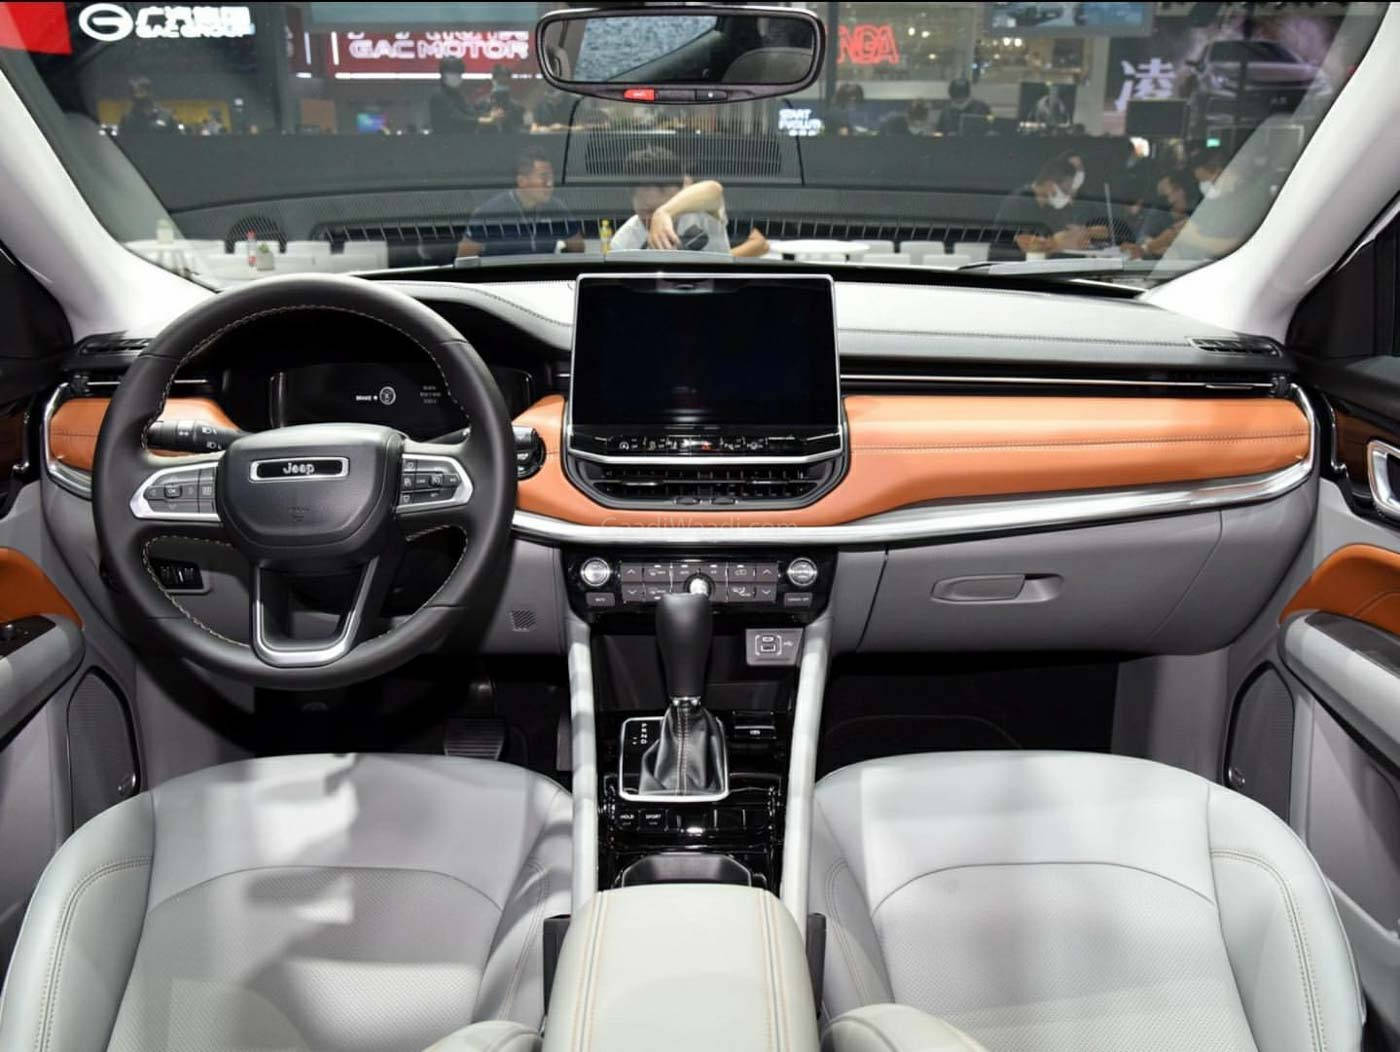 Luxurious Experience - Jeep Compass 2022 Interiors Wallpaper